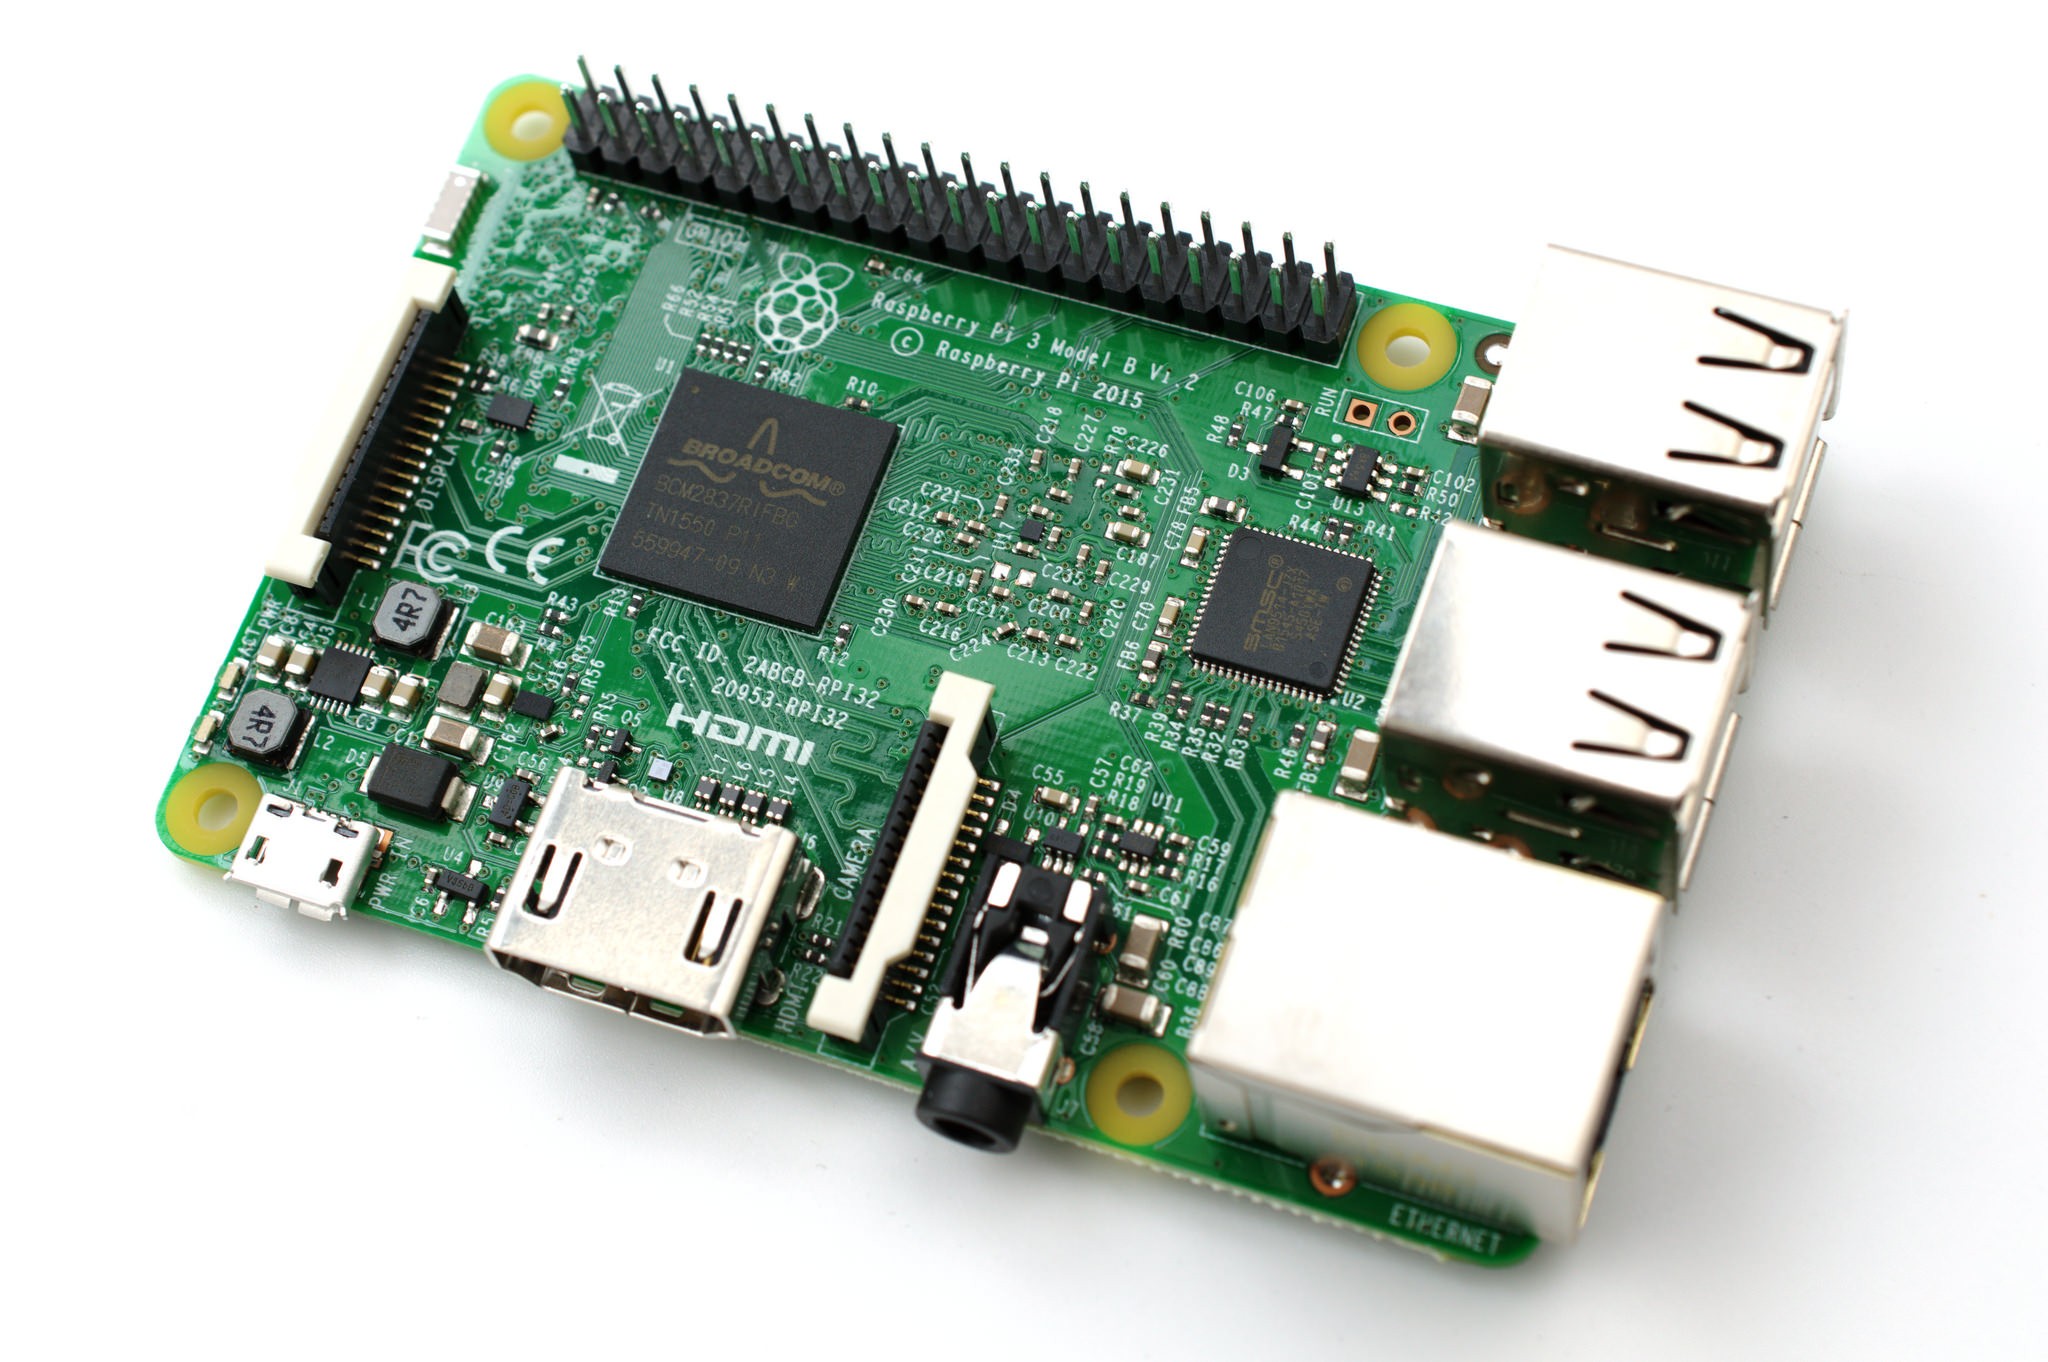 Raspberry Pi 3 with Heat Sink and Casing